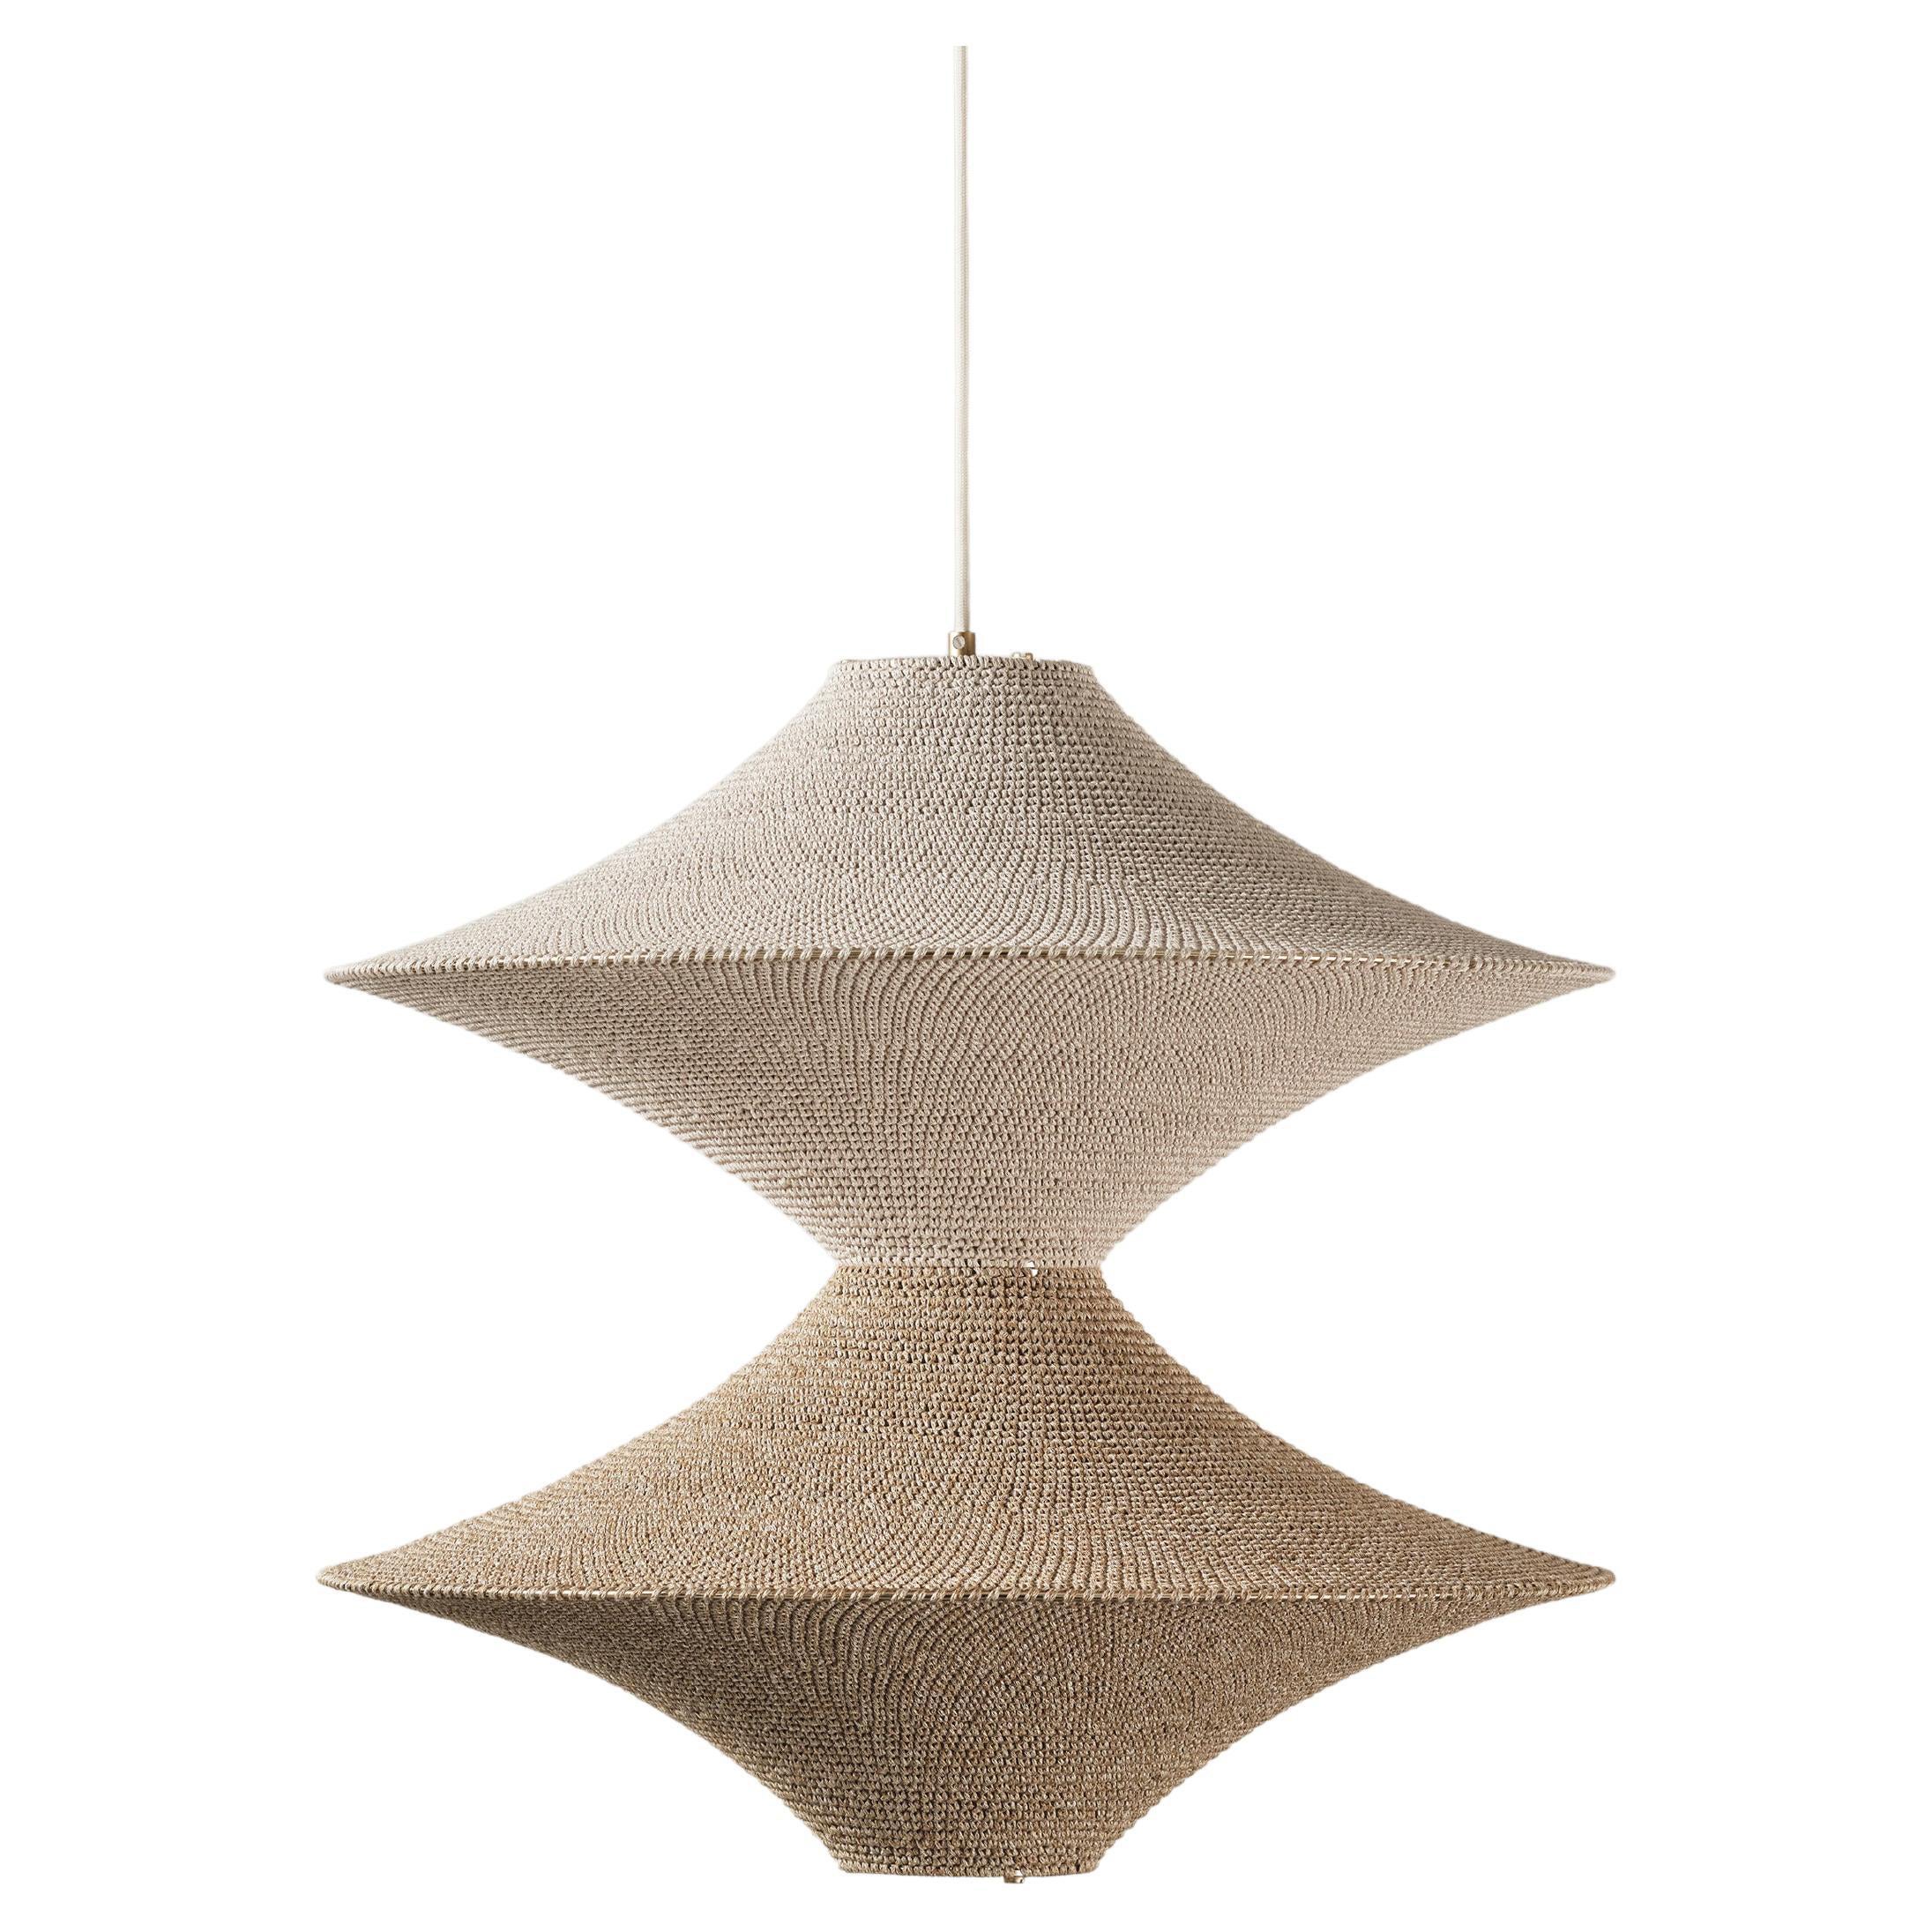 BAMBOO SOLITAIRE 02 Pendant Light Ø60cm/23.6in, Hand Crocheted in Bamboo Paper